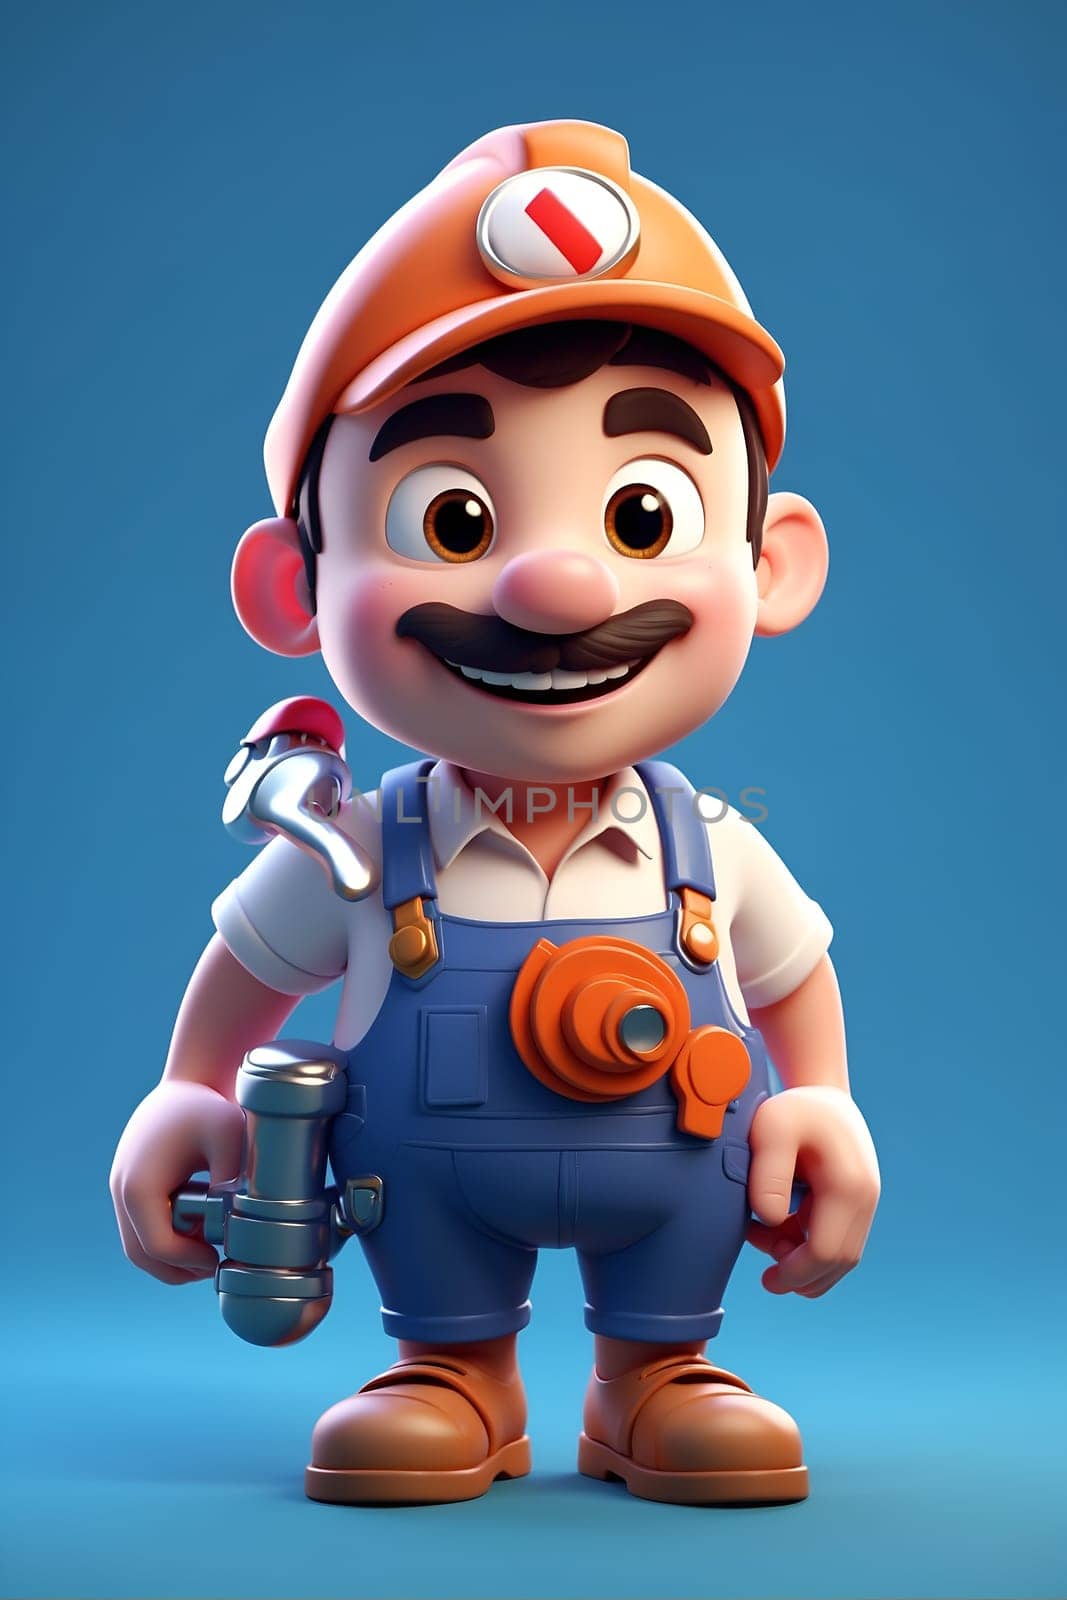 A fun and lively cartoon character wearing overalls and a helmet, ready for adventure!